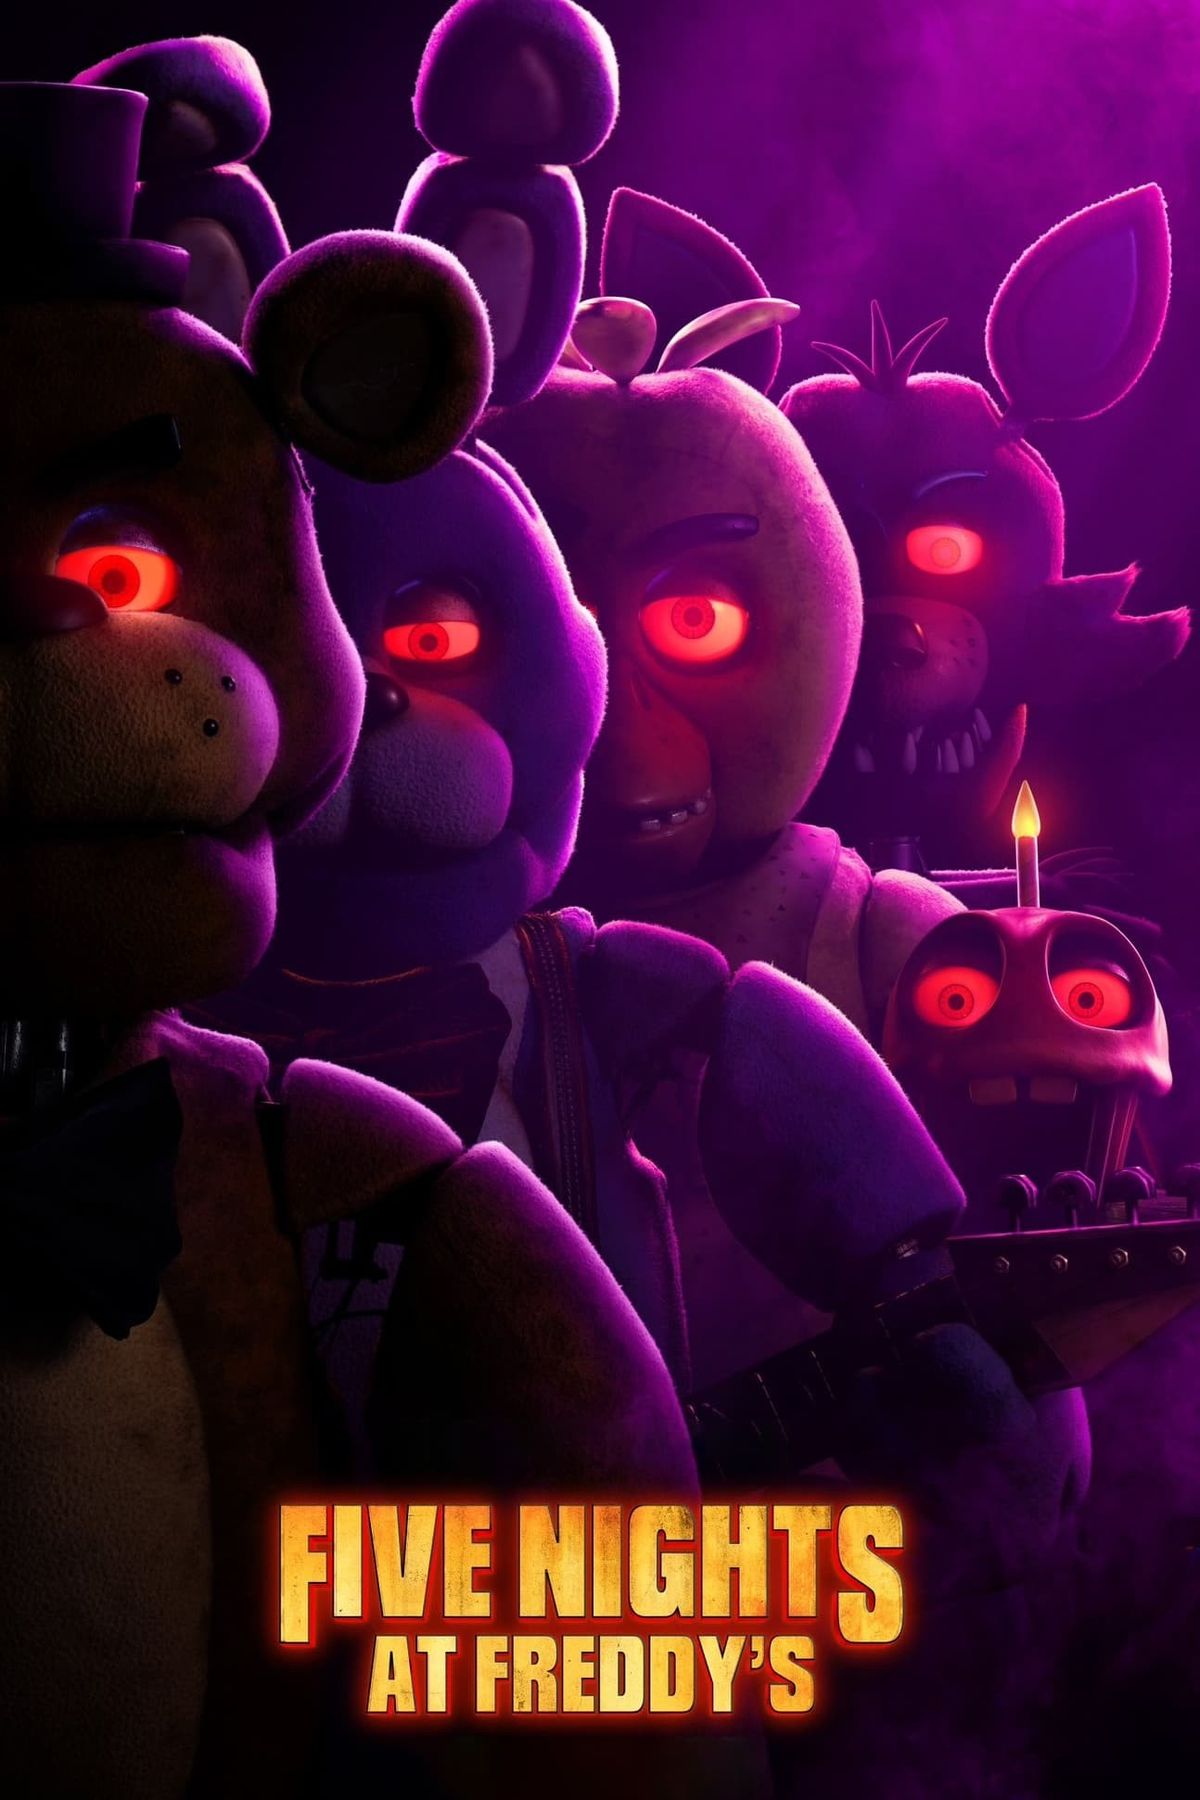 Five Nights at Freddy's 2: Release date, cast, trailer, plot